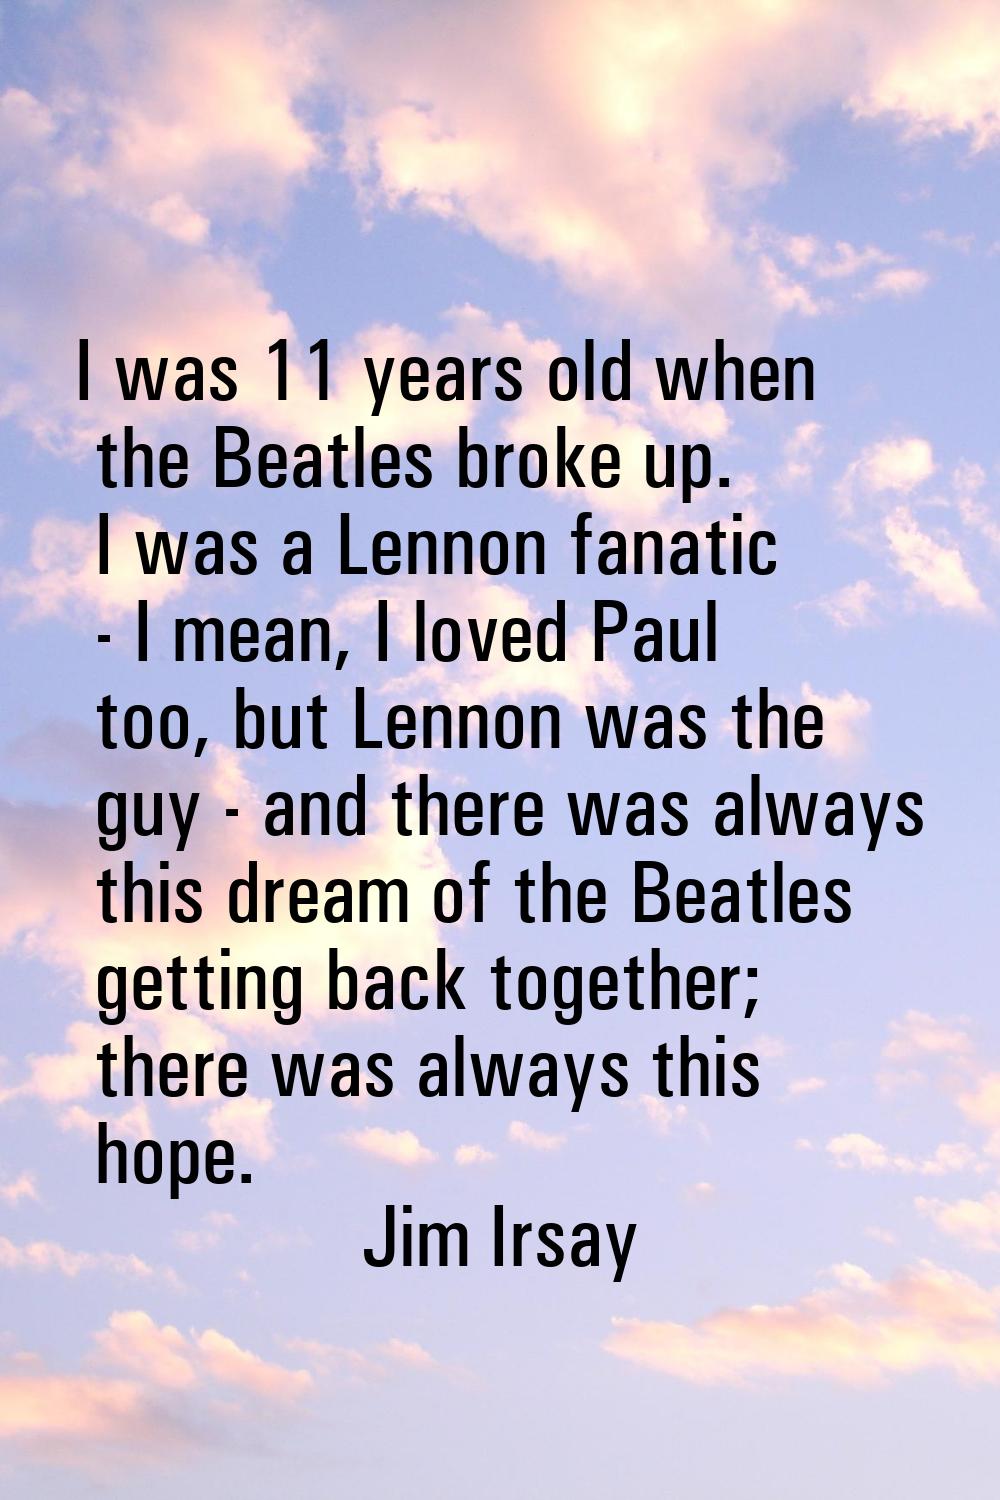 I was 11 years old when the Beatles broke up. I was a Lennon fanatic - I mean, I loved Paul too, bu